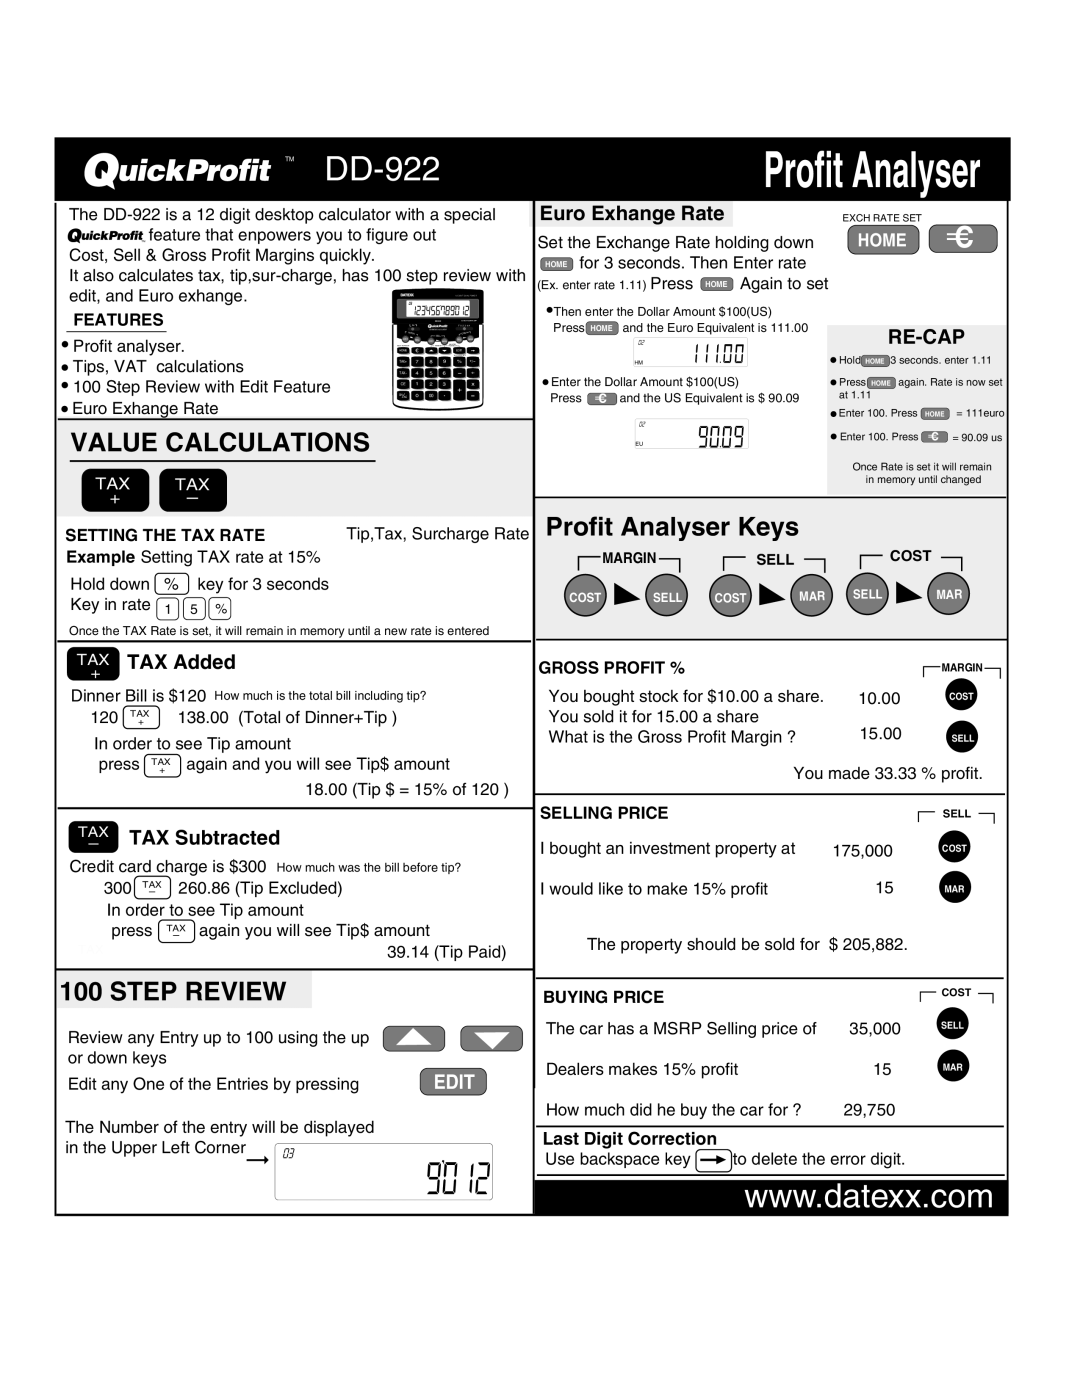 Datexx manual TM DD-922, Value Calculations, Profit Analyser Keys, Step Review, Euro Exhange Rate, Re-Cap, Home 